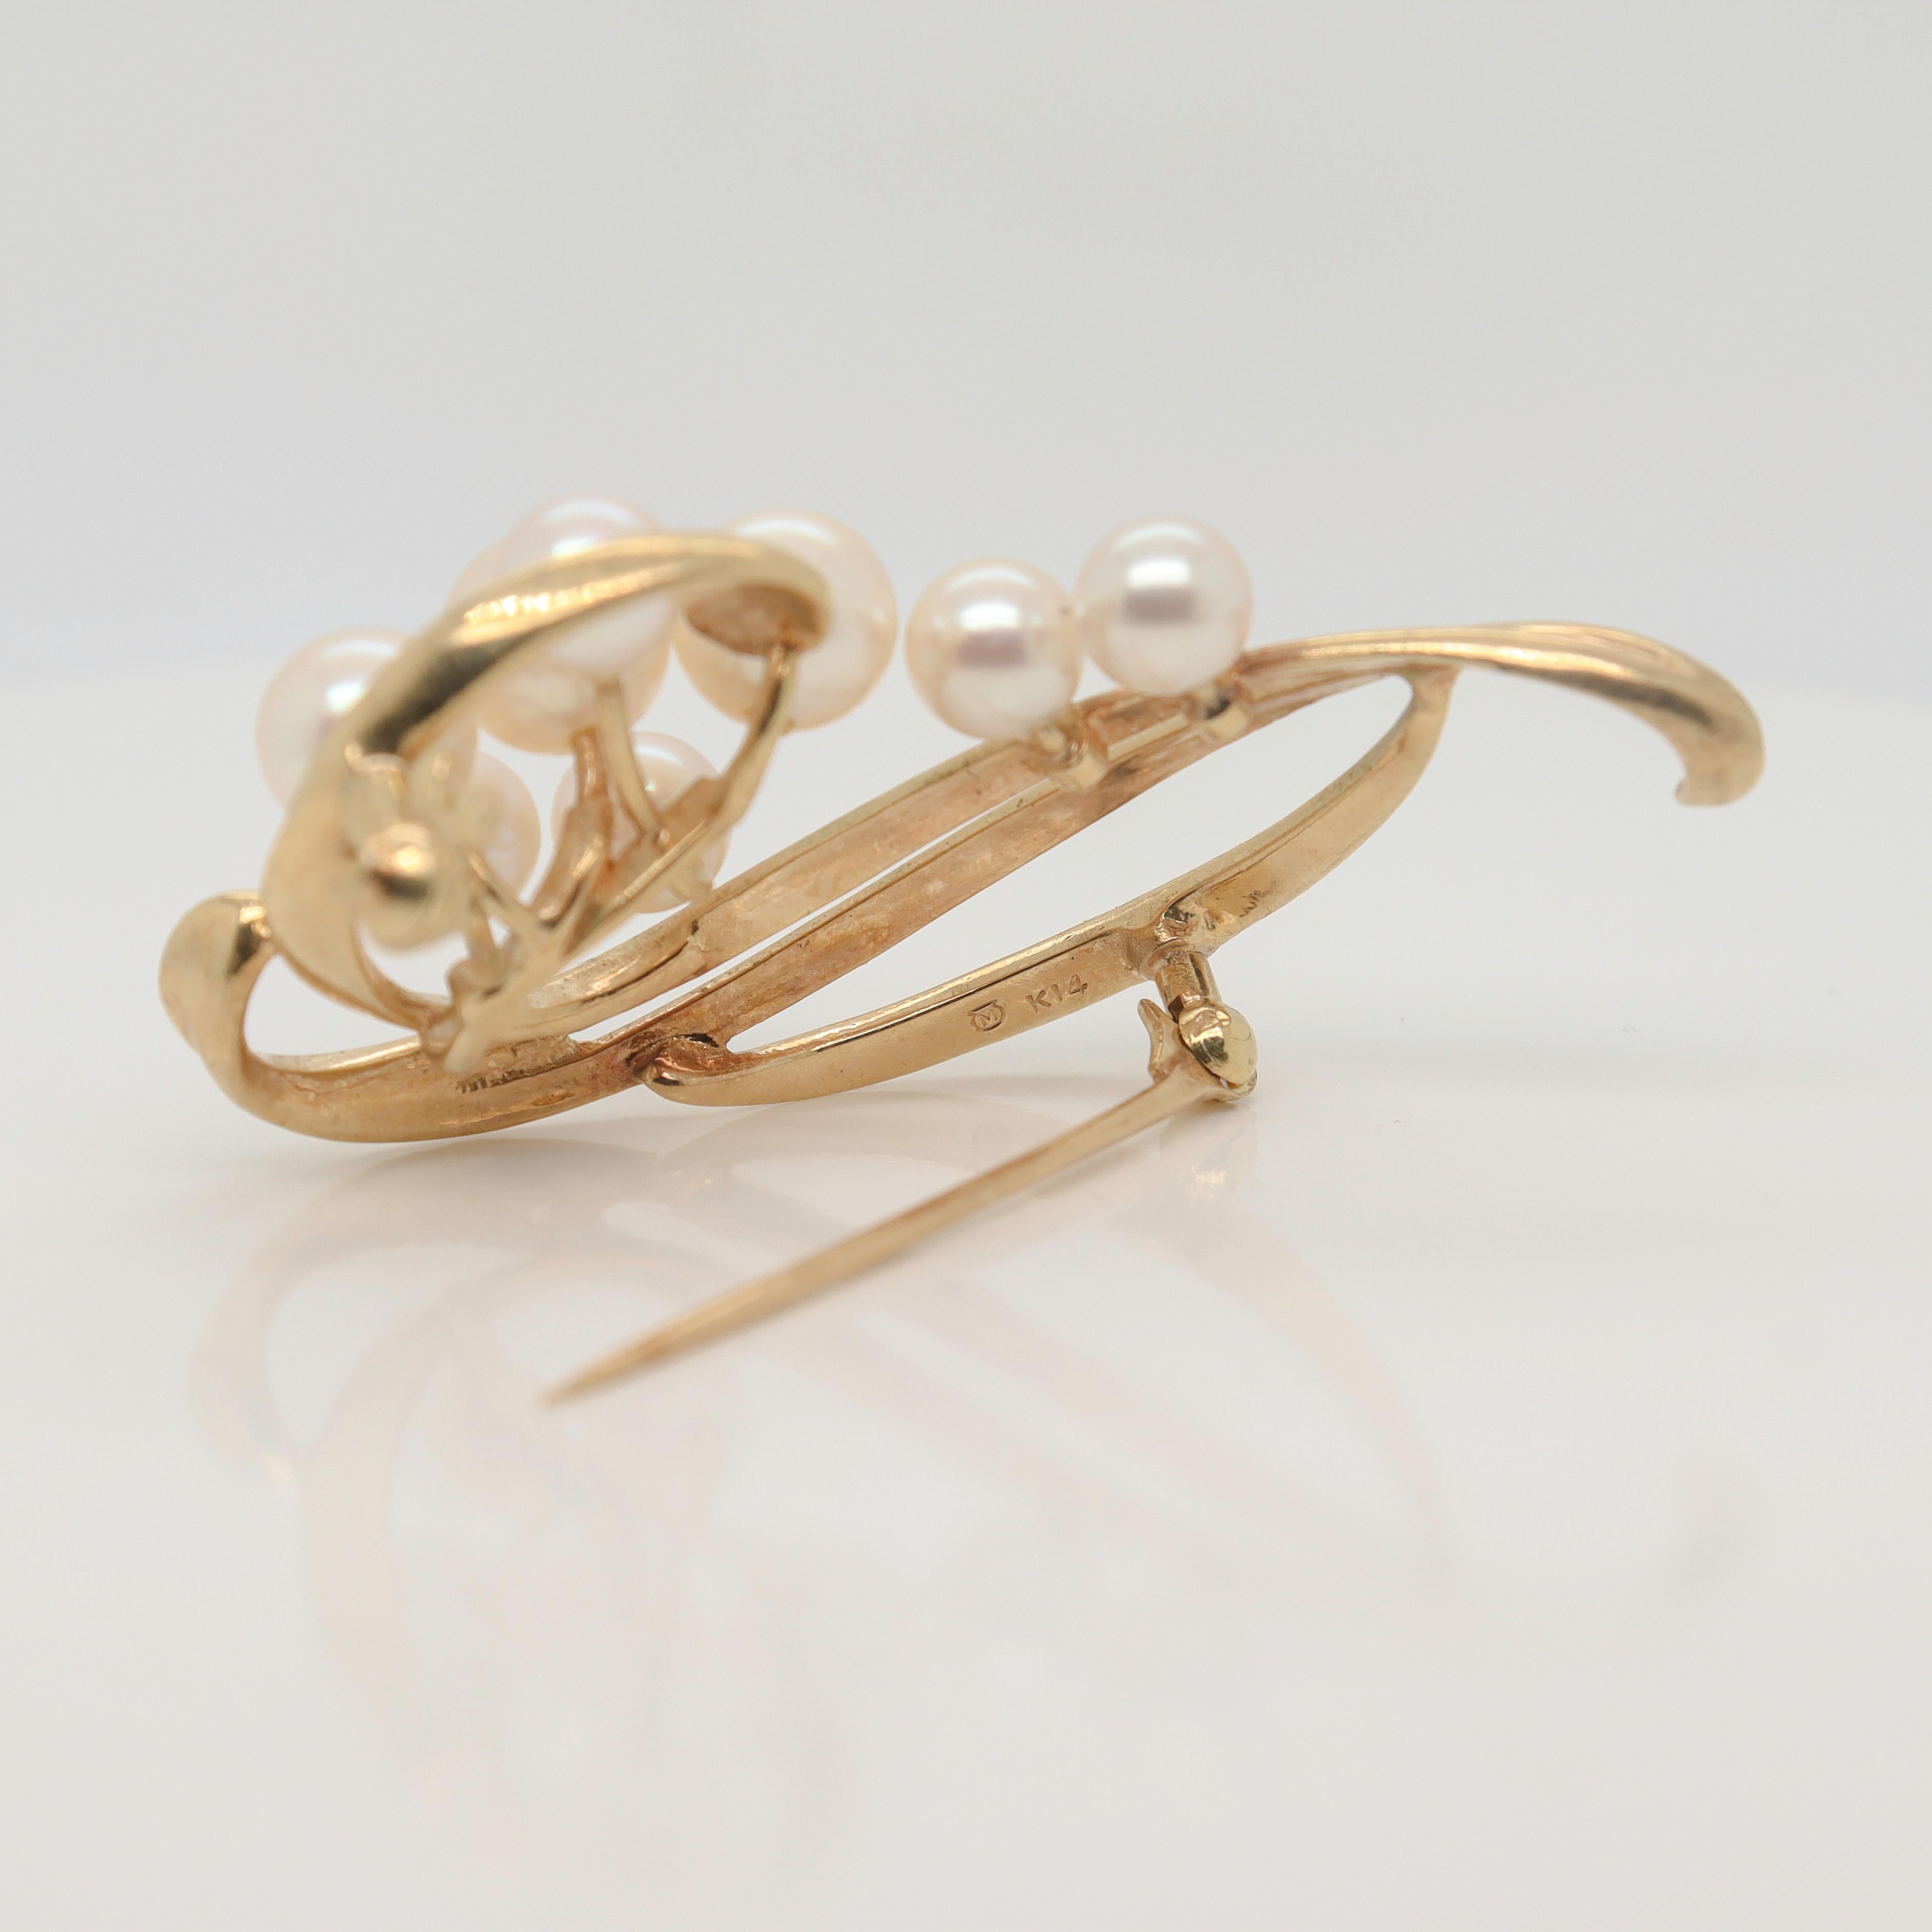 Mikimoto Modernist 14k Gold & Akoya Pearl Brooch or Pin For Sale 5